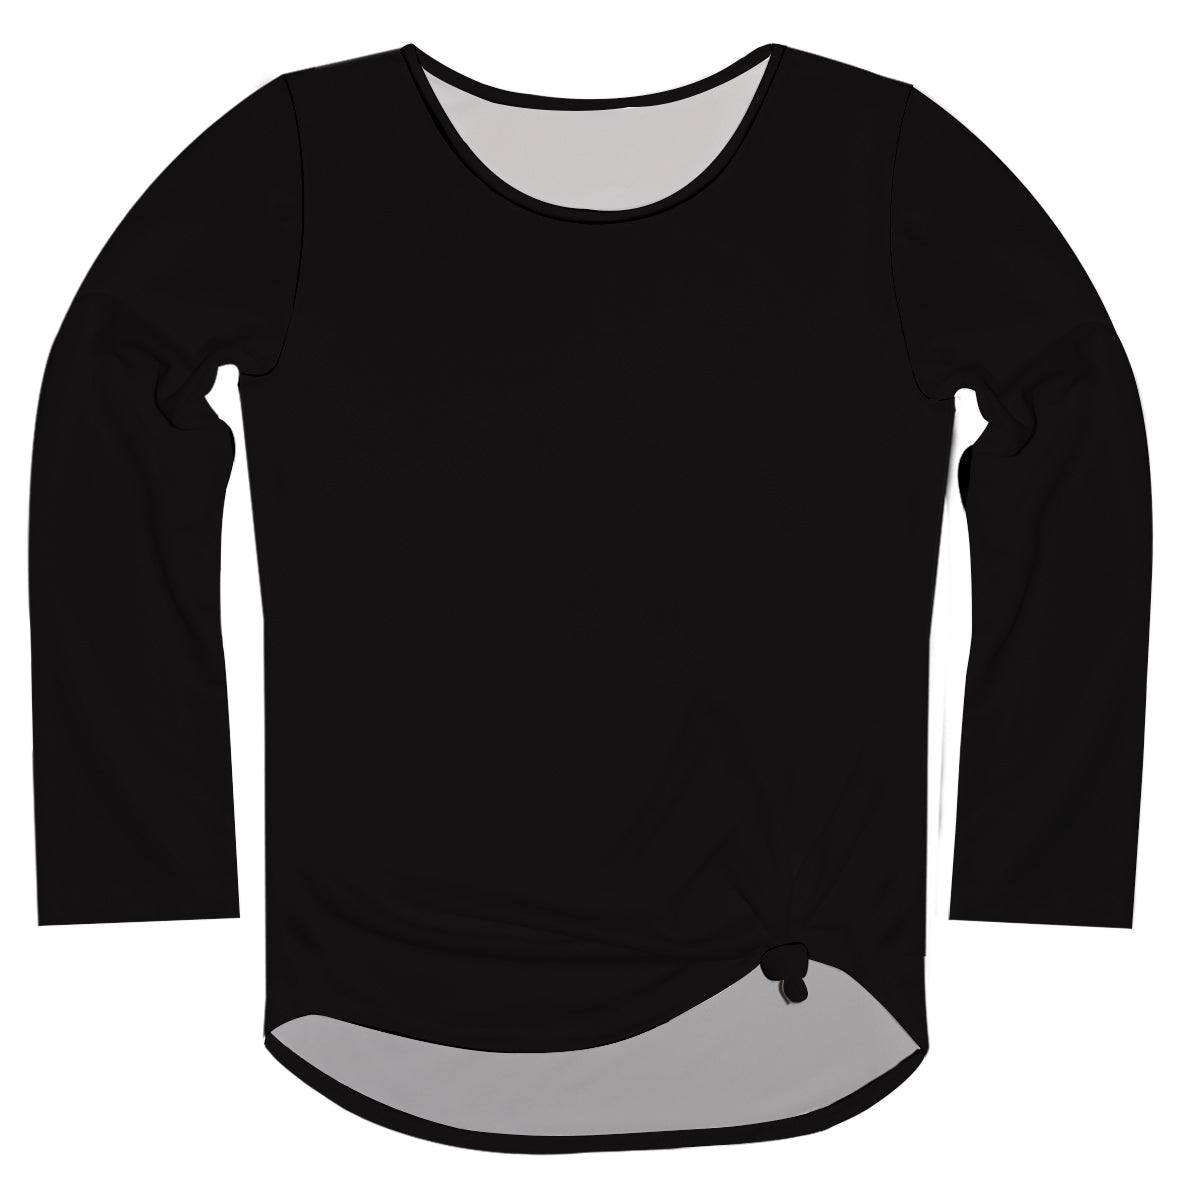 All Black Long Sleeve Knot Top